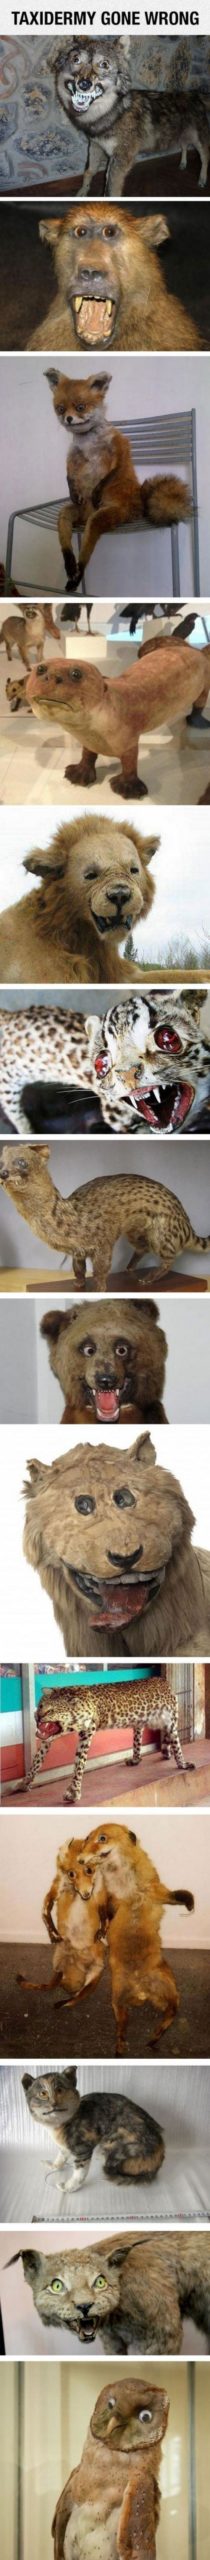 Taxidermy+gone+wrong